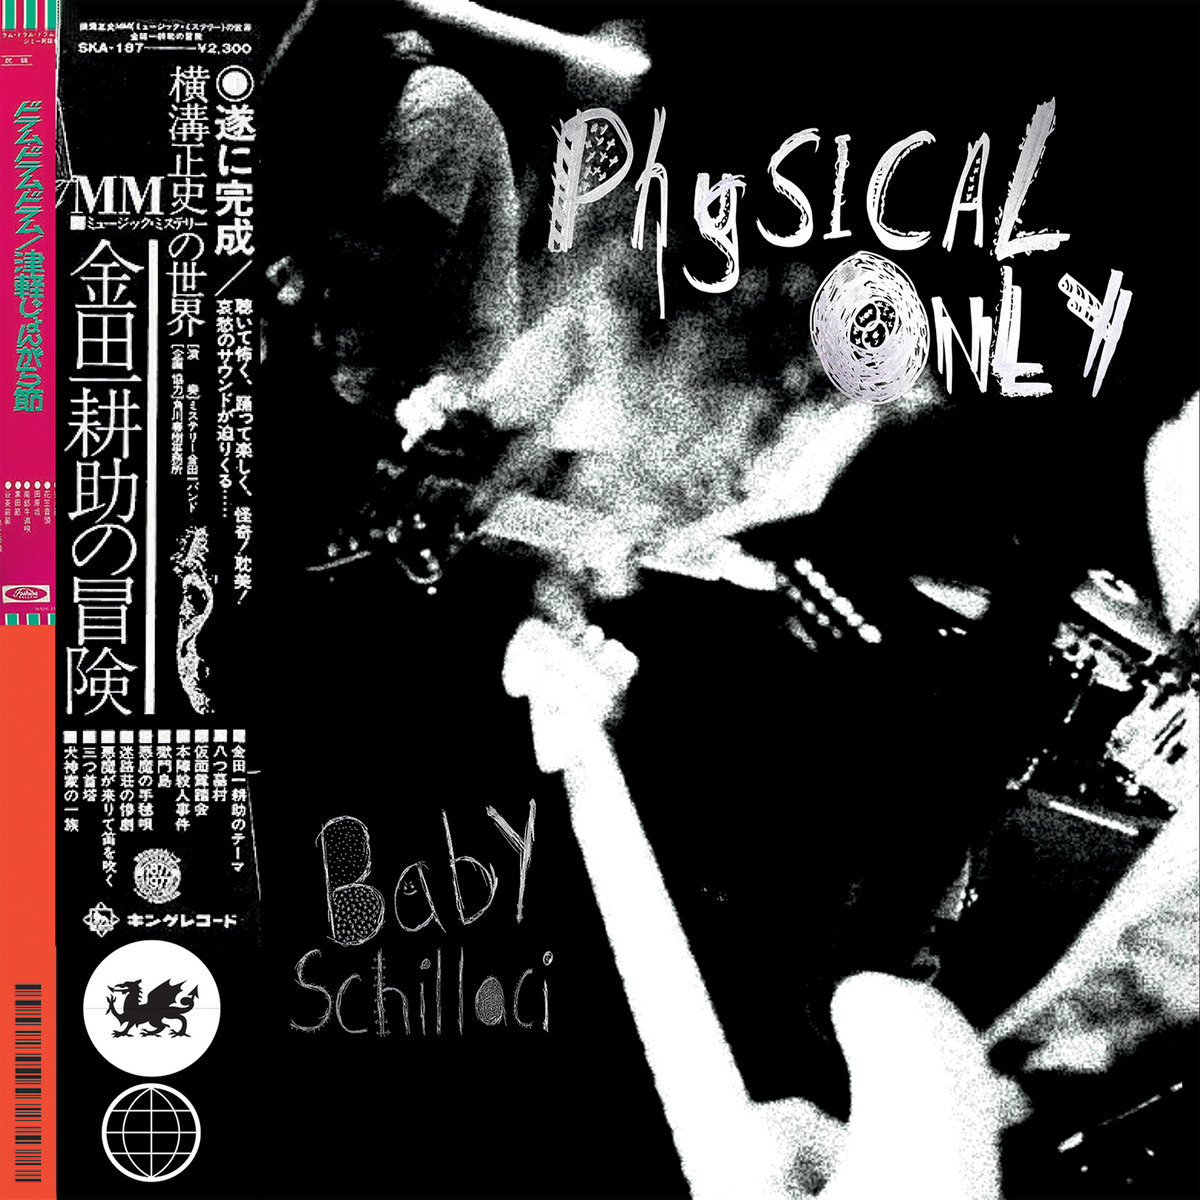 DEBUT EP REVIEW: Physical Only by Baby Schillaci